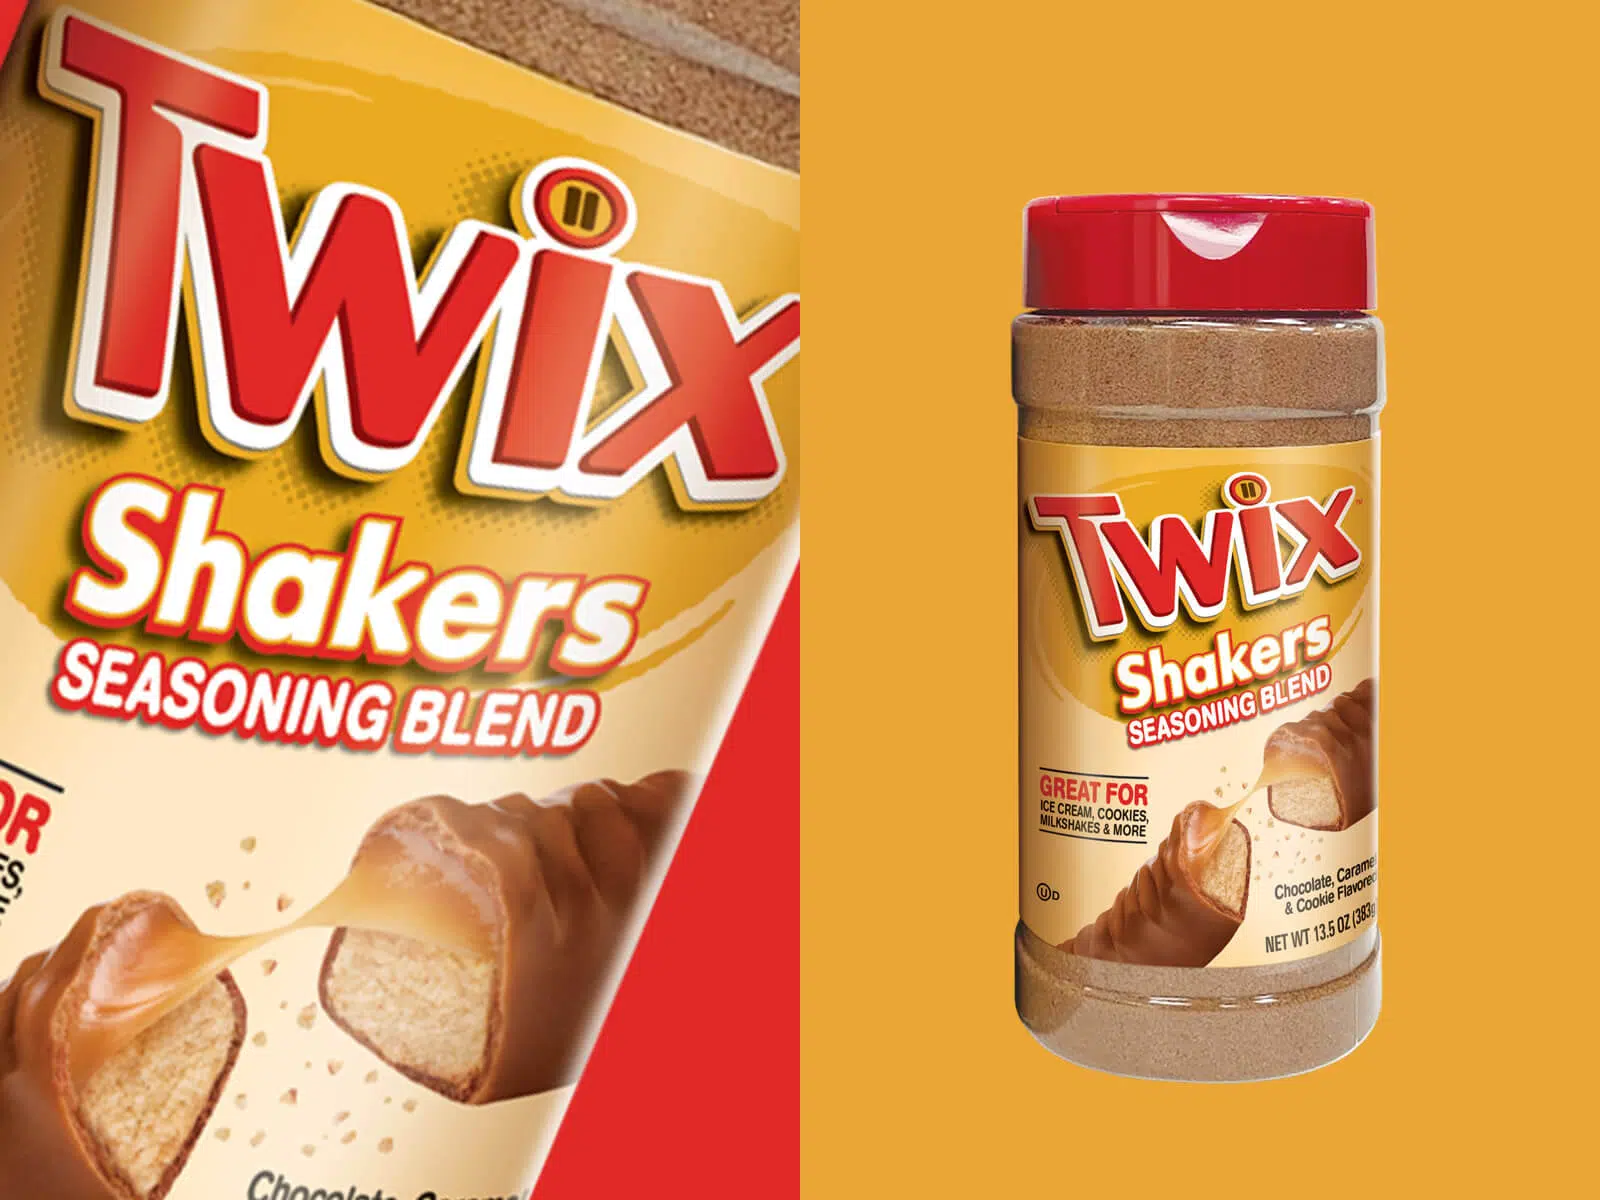 Twix Comes In A Shakable Seasoning Blend